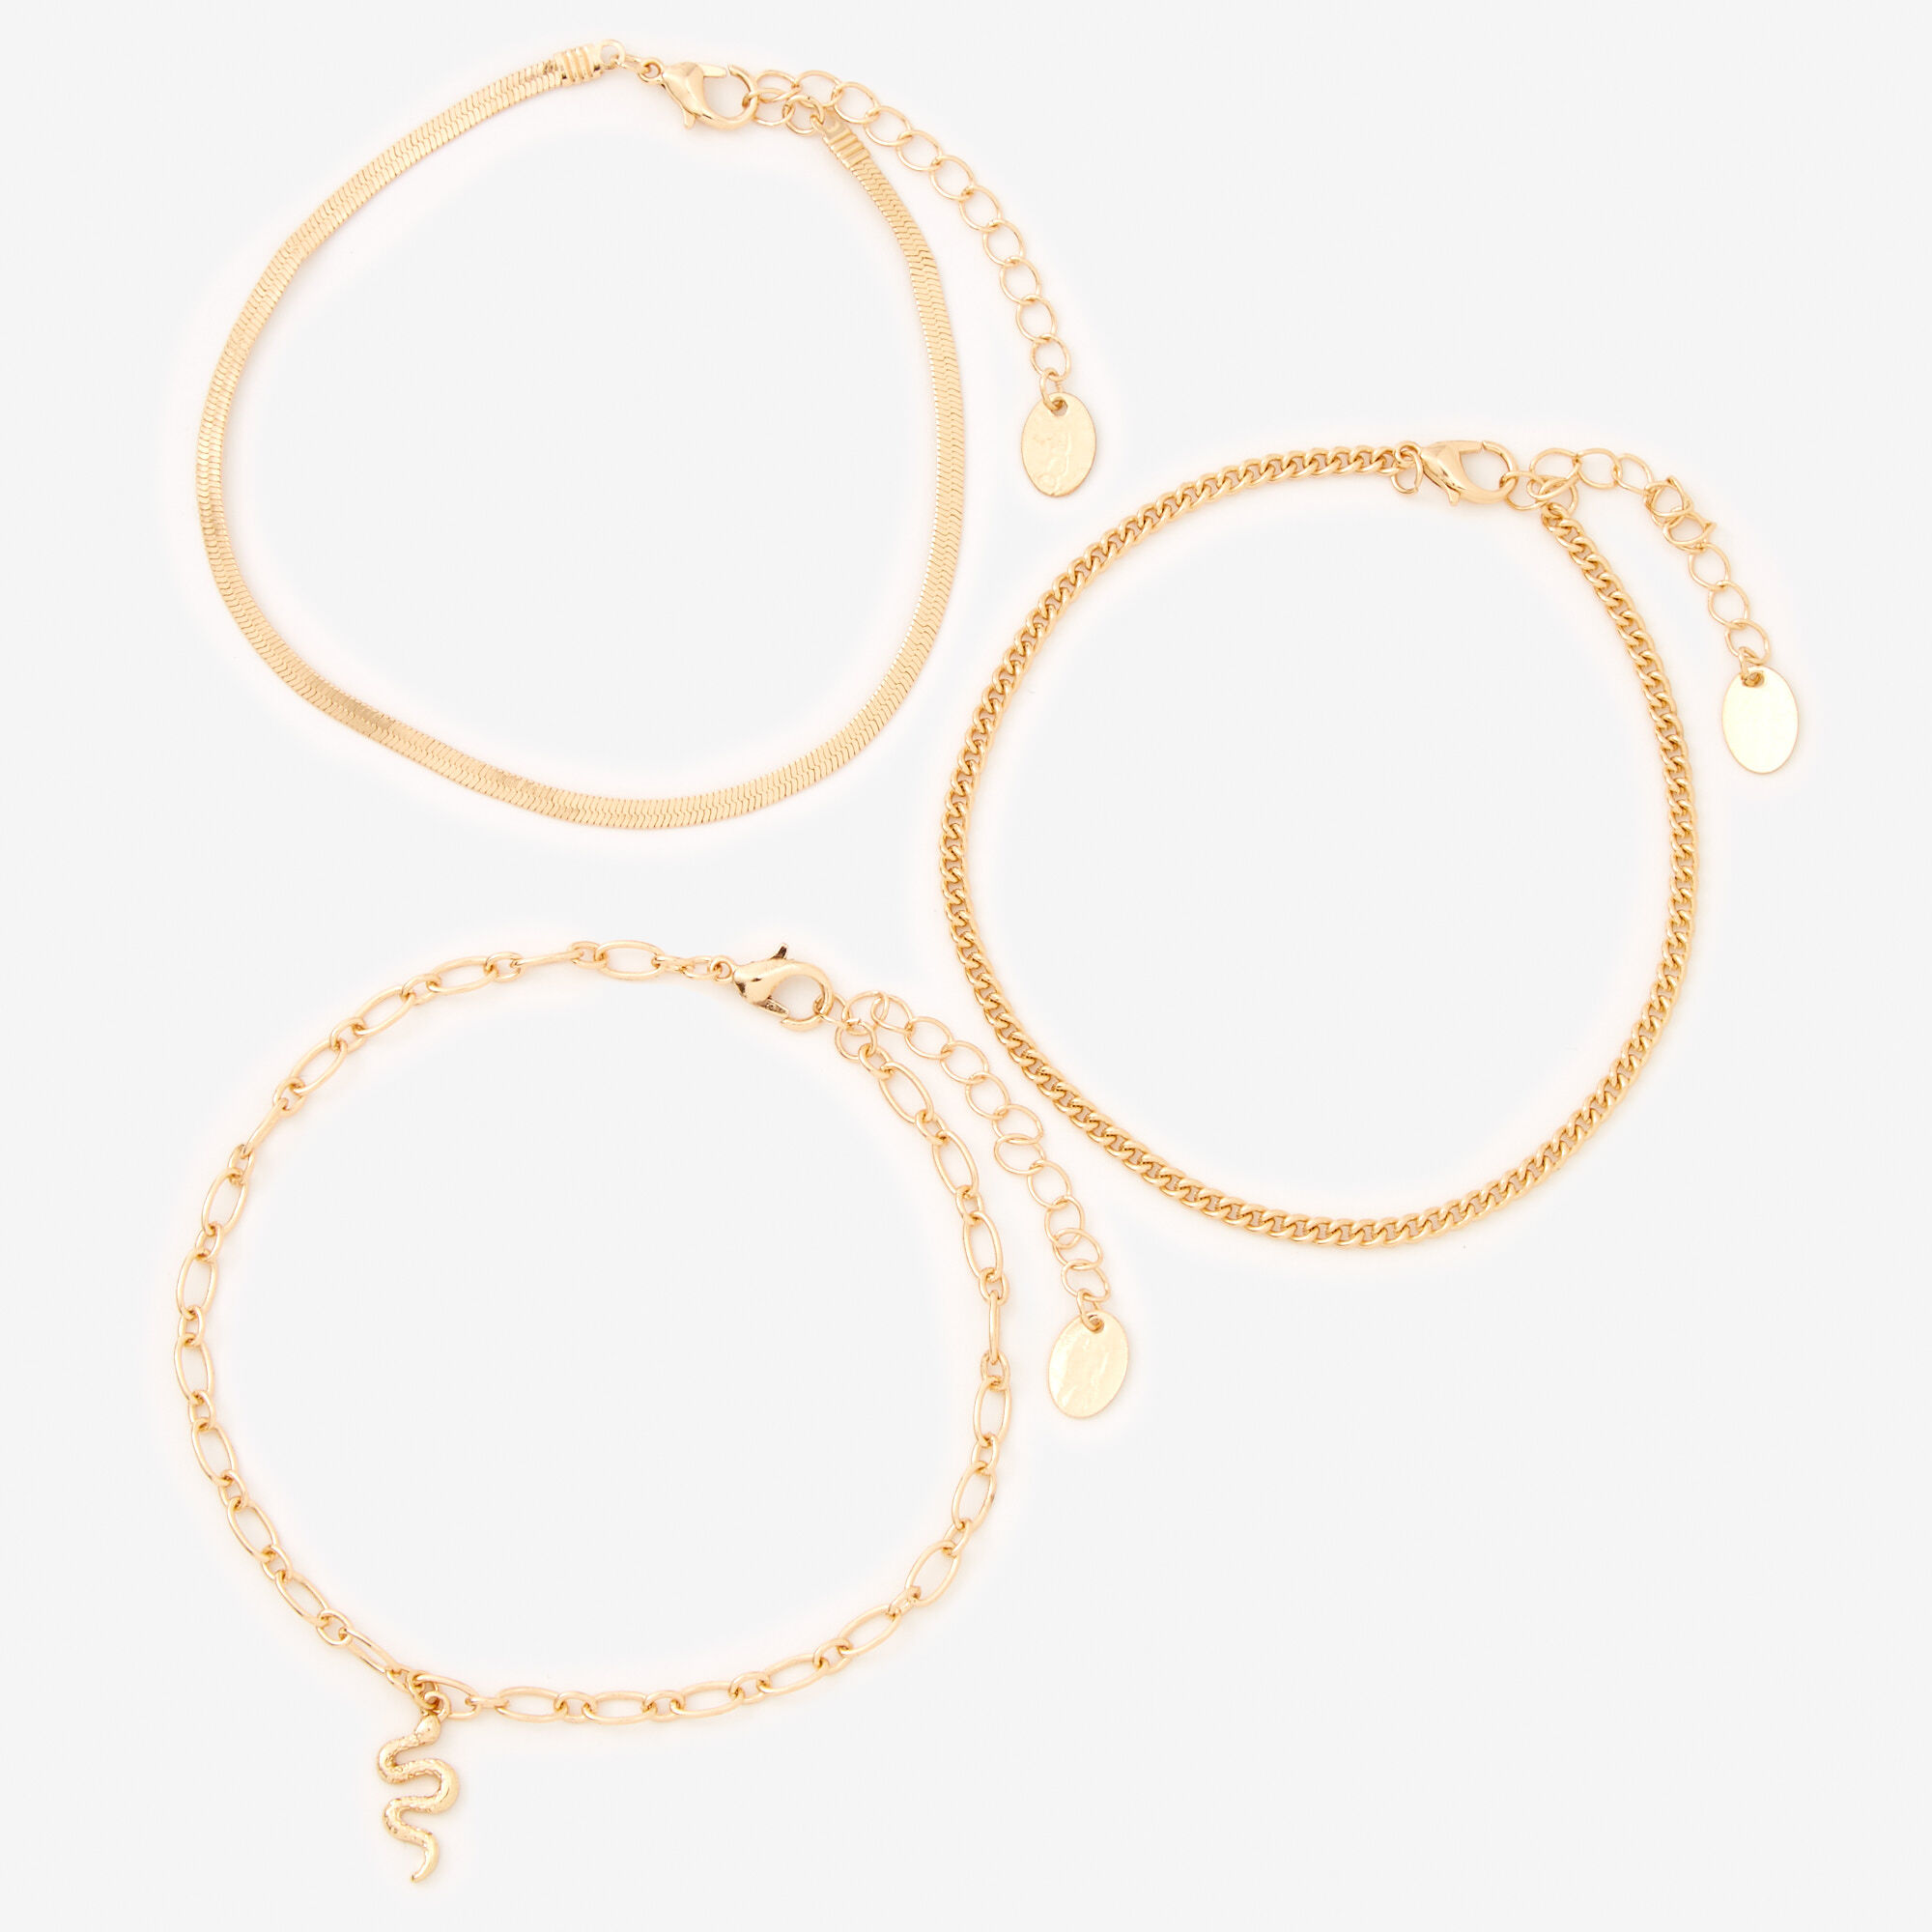 View Claires Tone Snake Charm Anklets 3 Pack Gold information